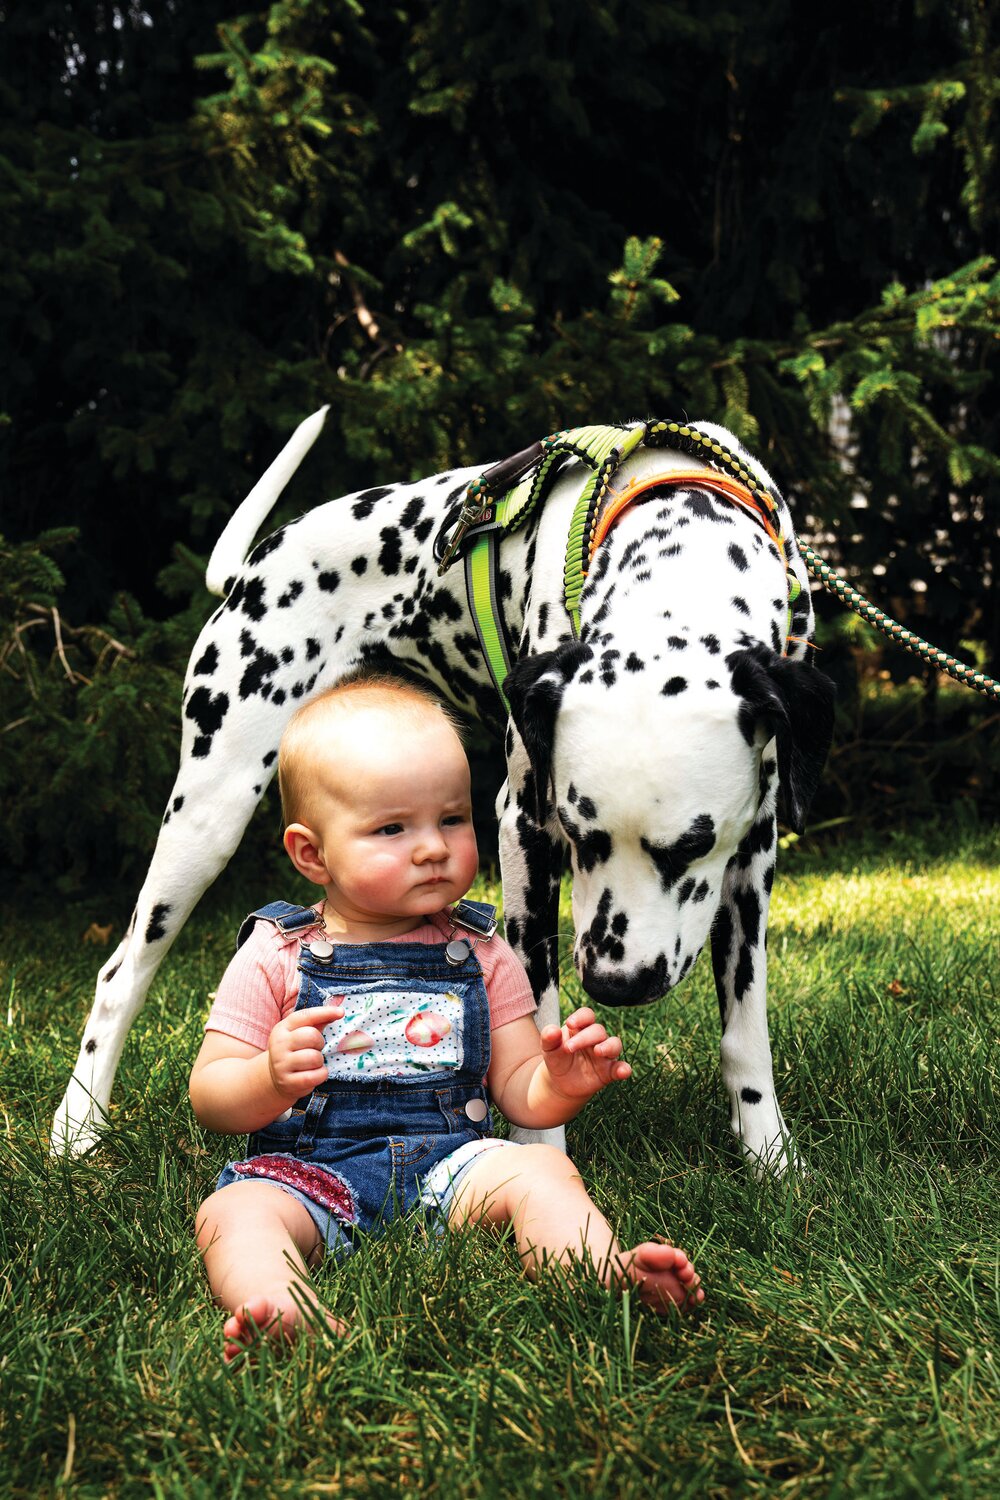 Sunny Sztenderowicz and Jackson the Dalmatian enjoy the company of each other at Peddler’s Village’s Peach Festival.